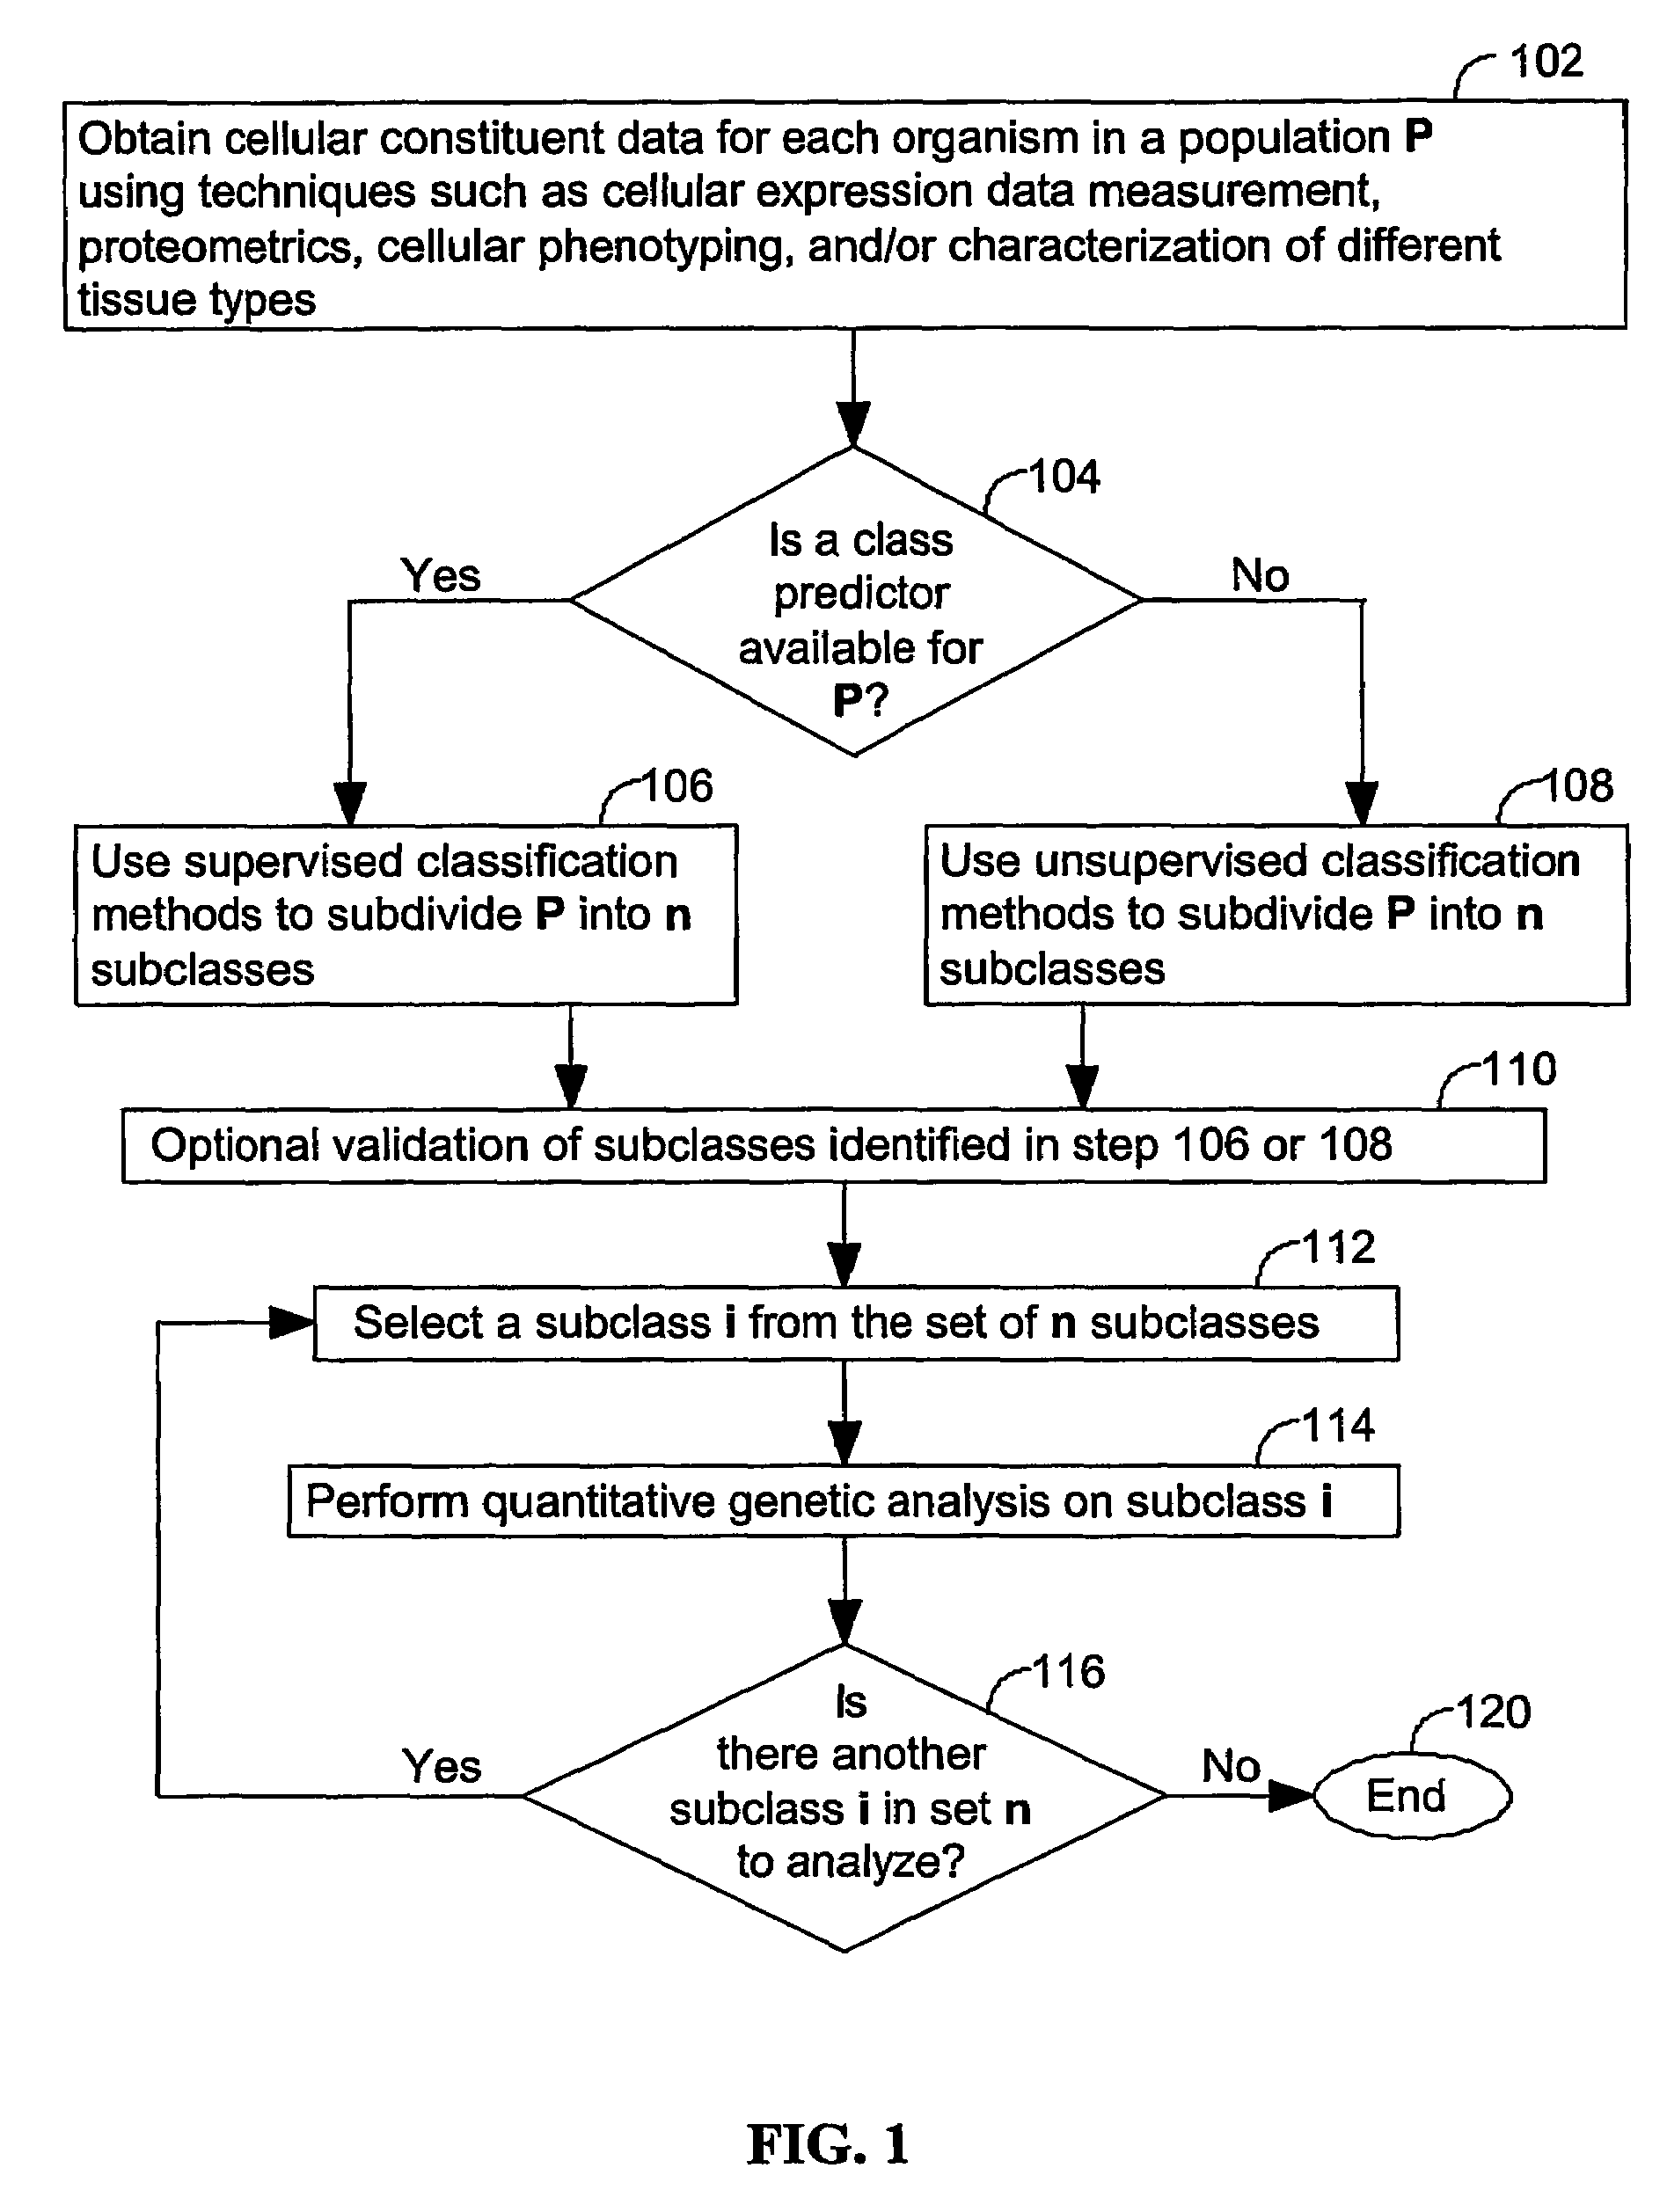 Computer systems and methods for subdividing a complex disease into component diseases